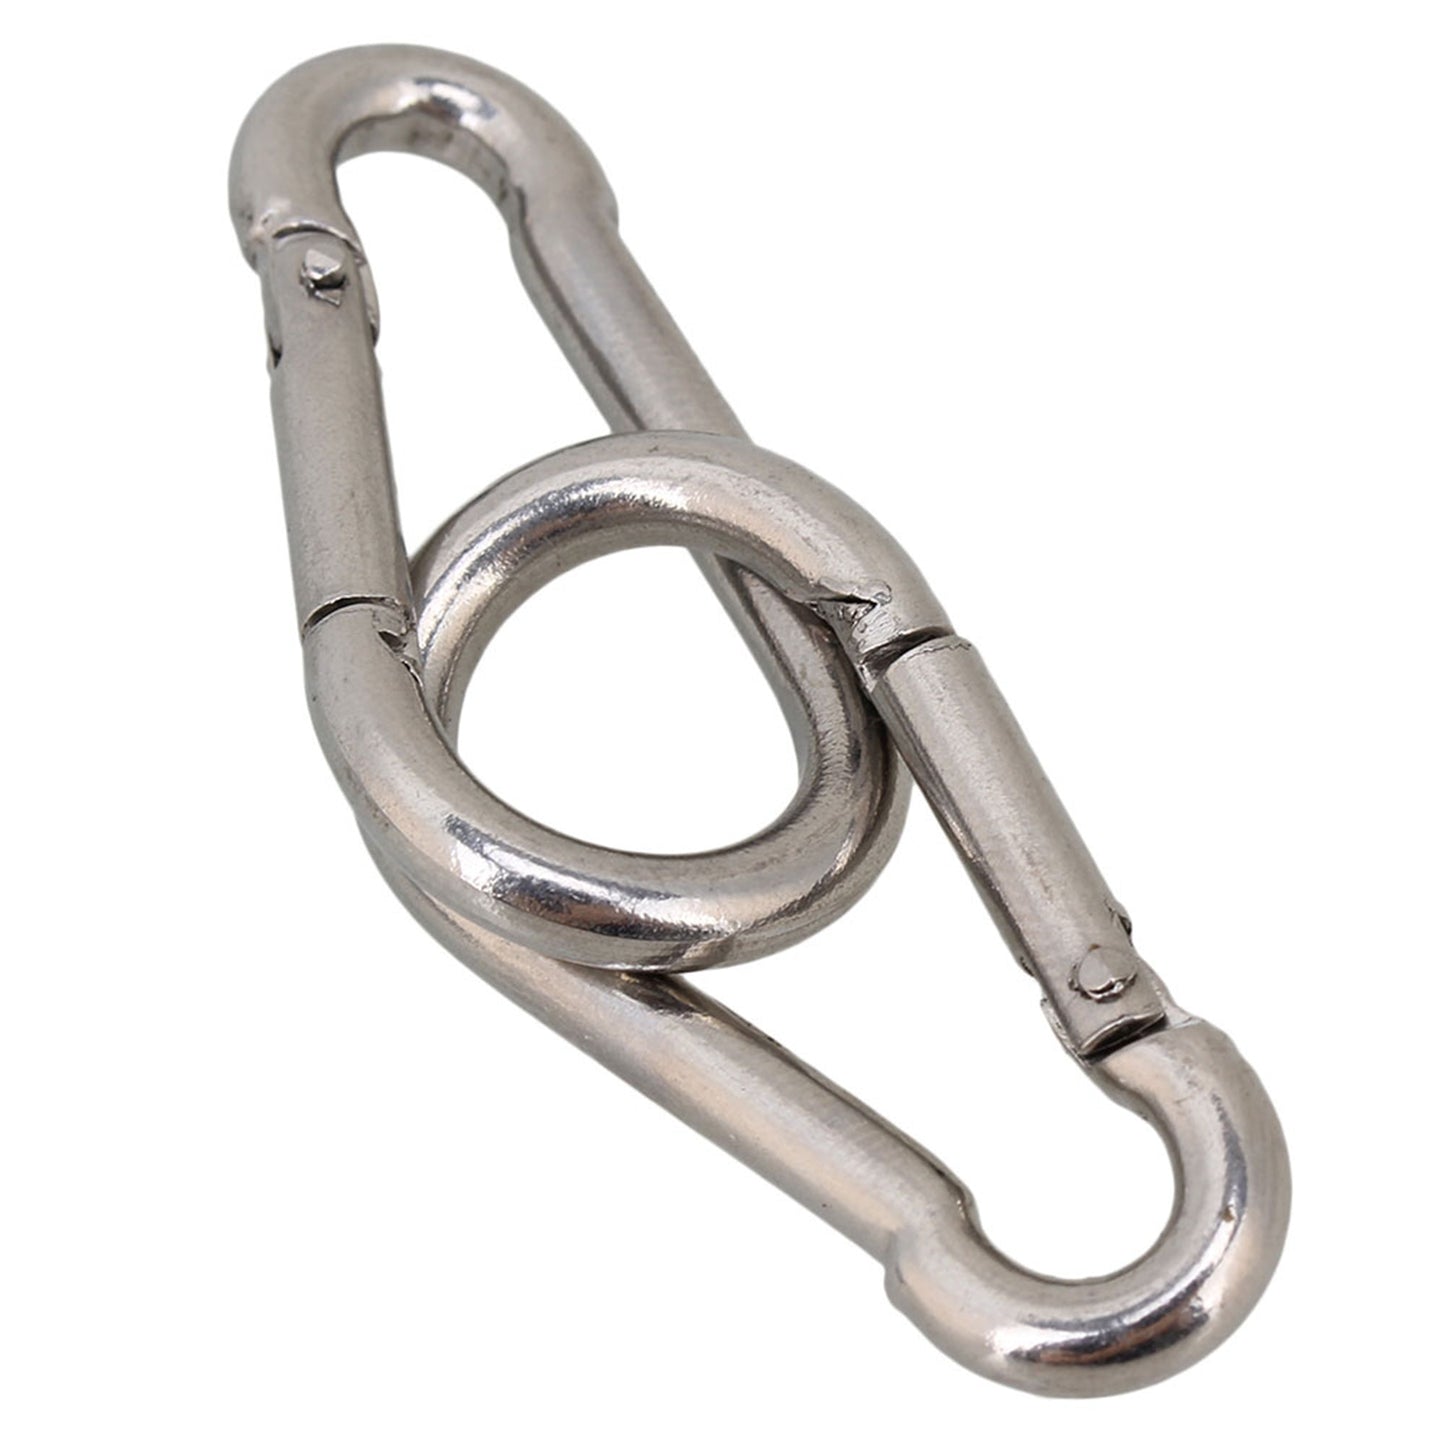 BQLZR 40x19.5x5.6mm Stainless Steel Spring Snap Hook for Wire Rope Link Pack of 10